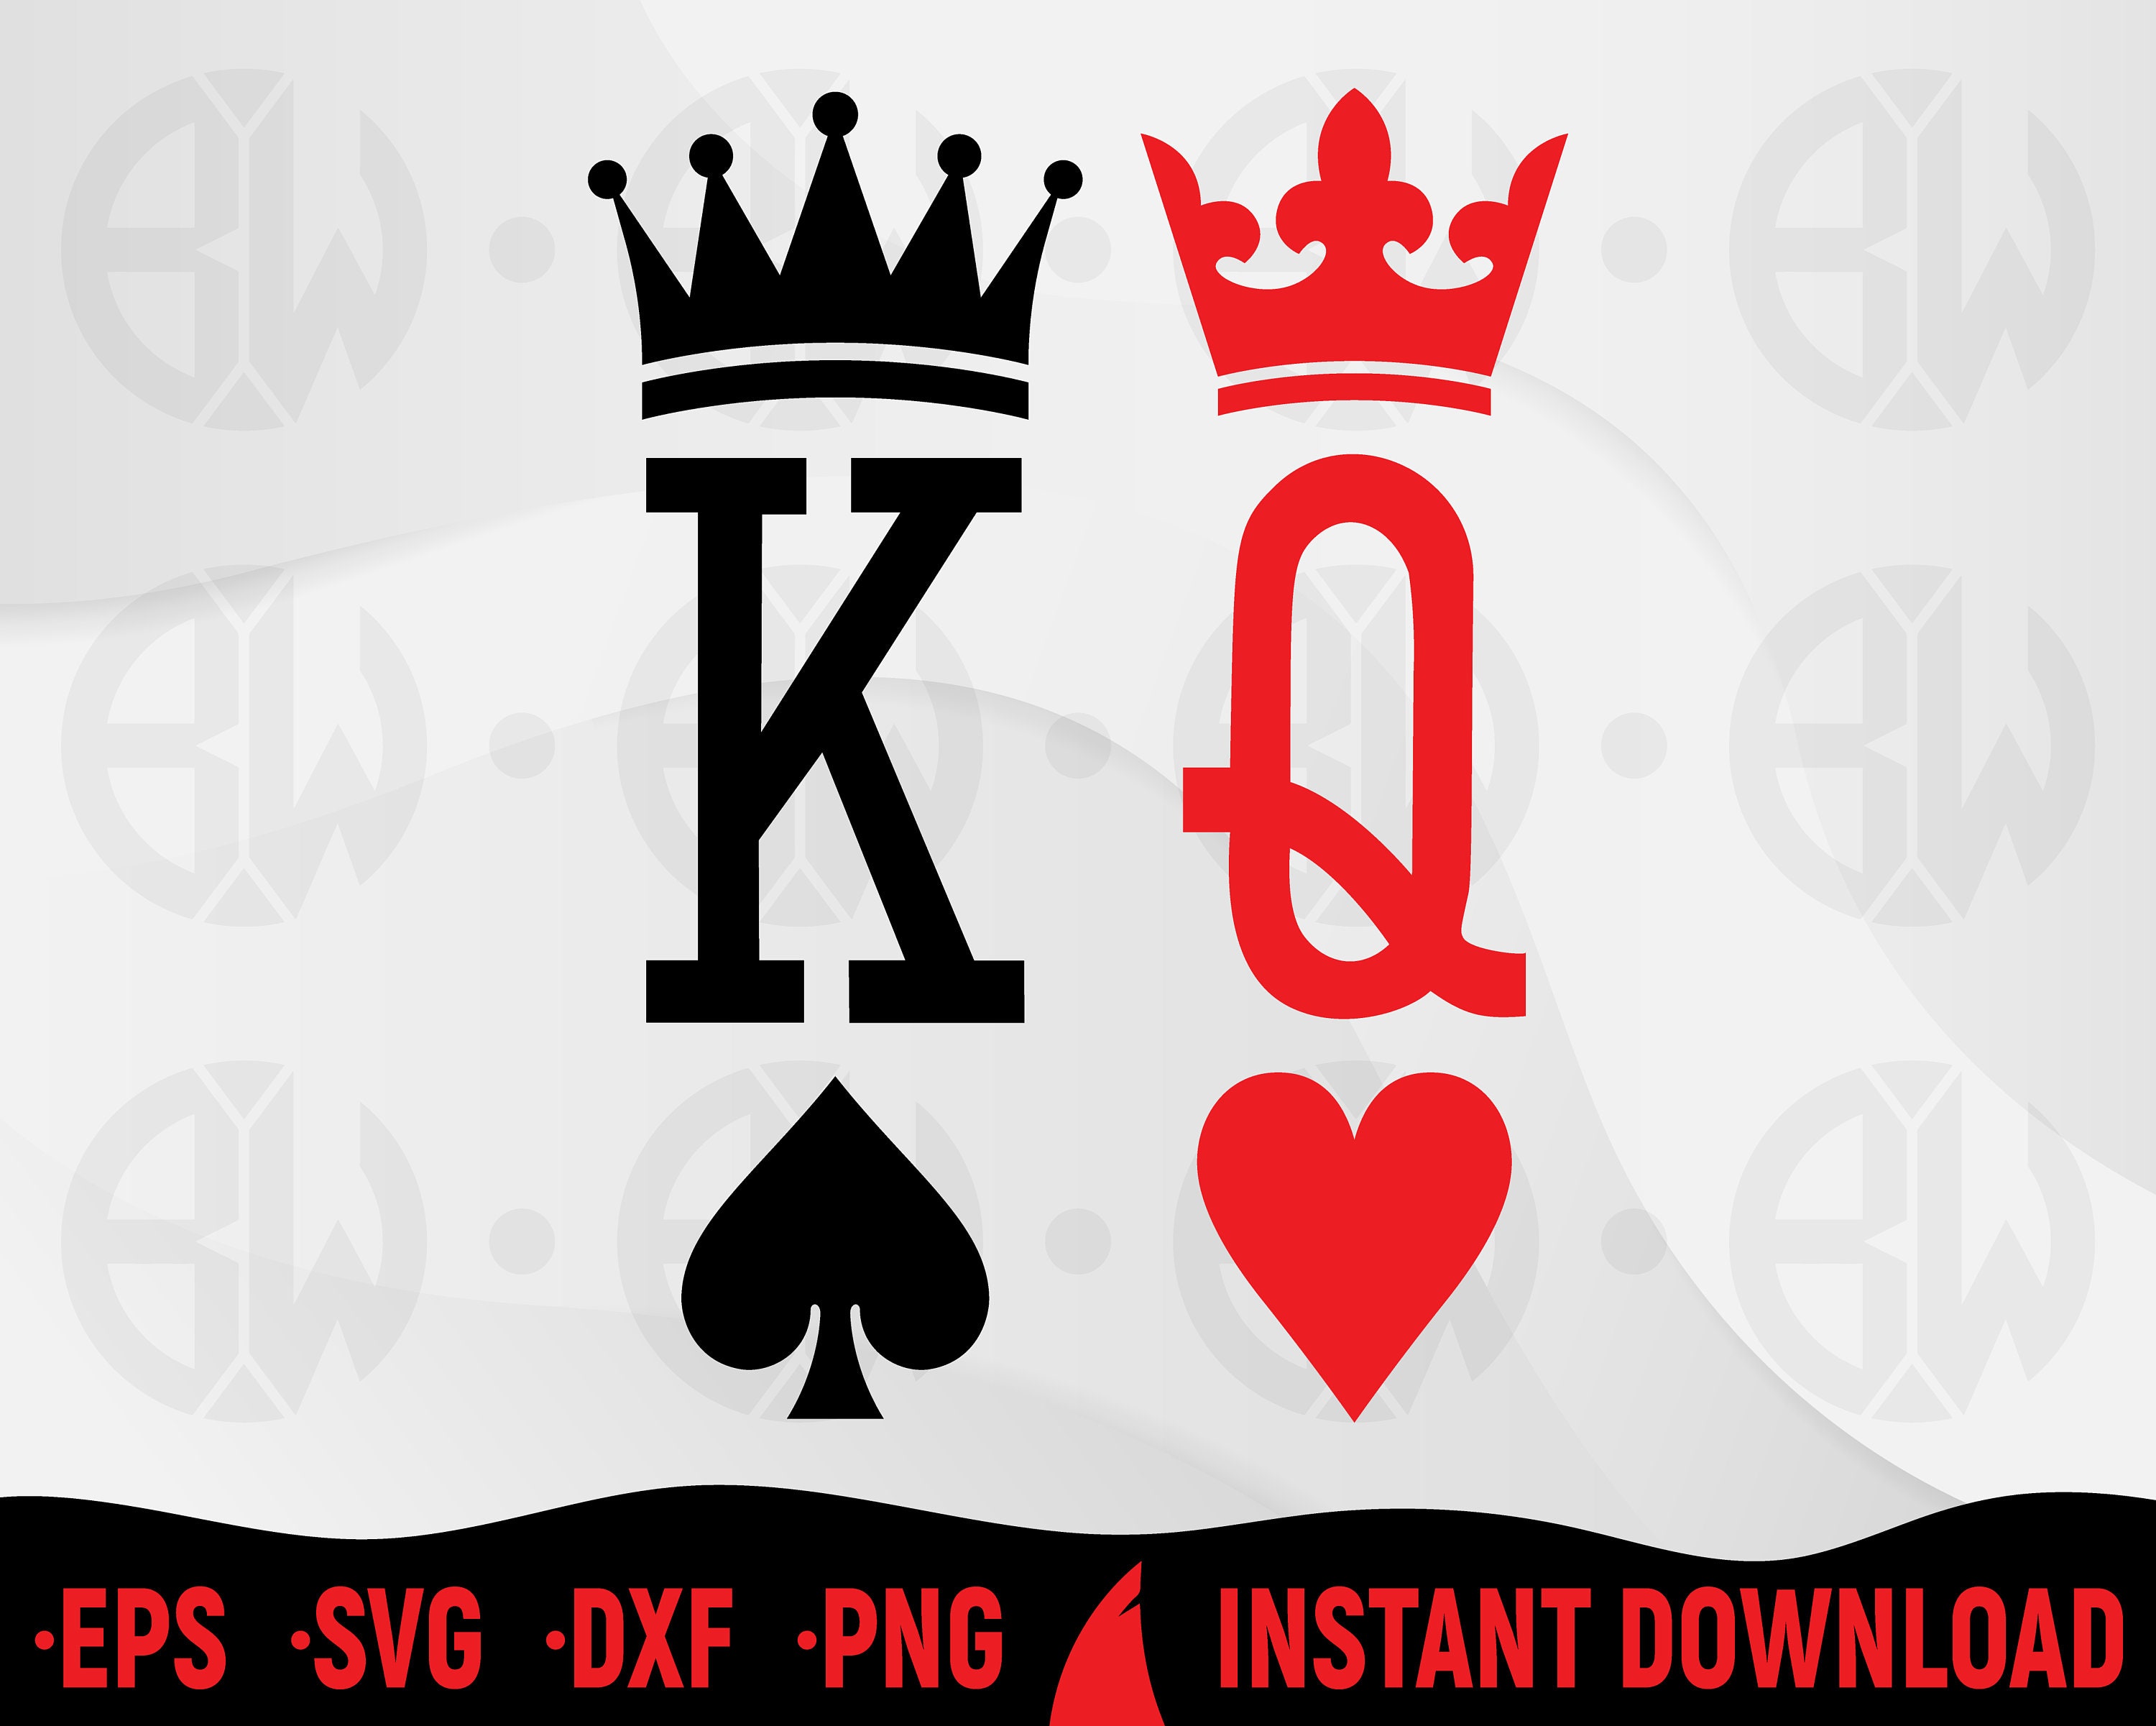 Dxf, Png, Svg, - King Queen SVG, King Files, Royal Svg, Hearts Queen Svg, of Spades, Eps, Svg Playing King File, Cards Cutting Etsy and Design Norway of